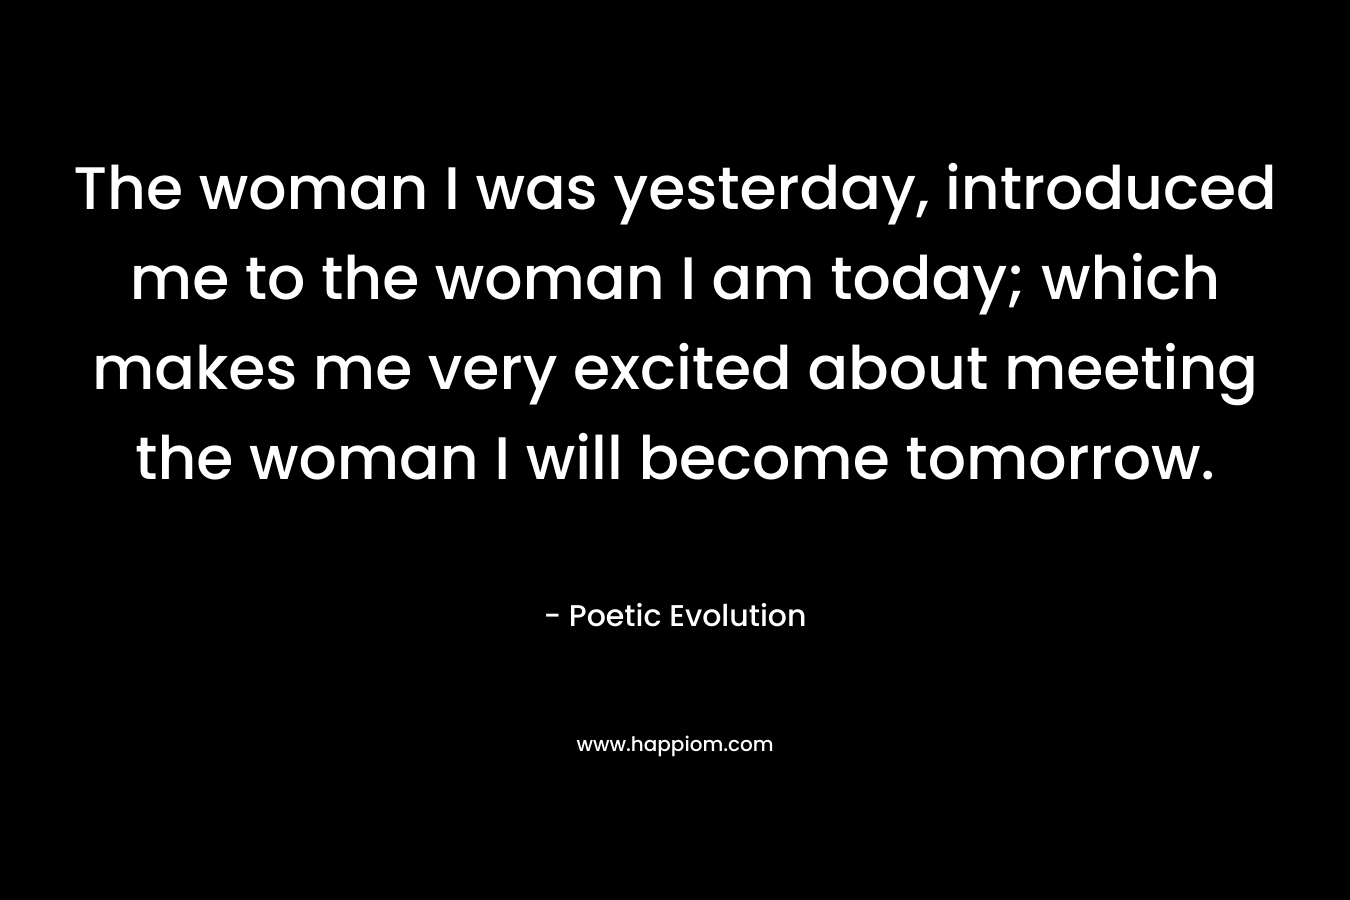 The woman I was yesterday, introduced me to the woman I am today; which makes me very excited about meeting the woman I will become tomorrow. 